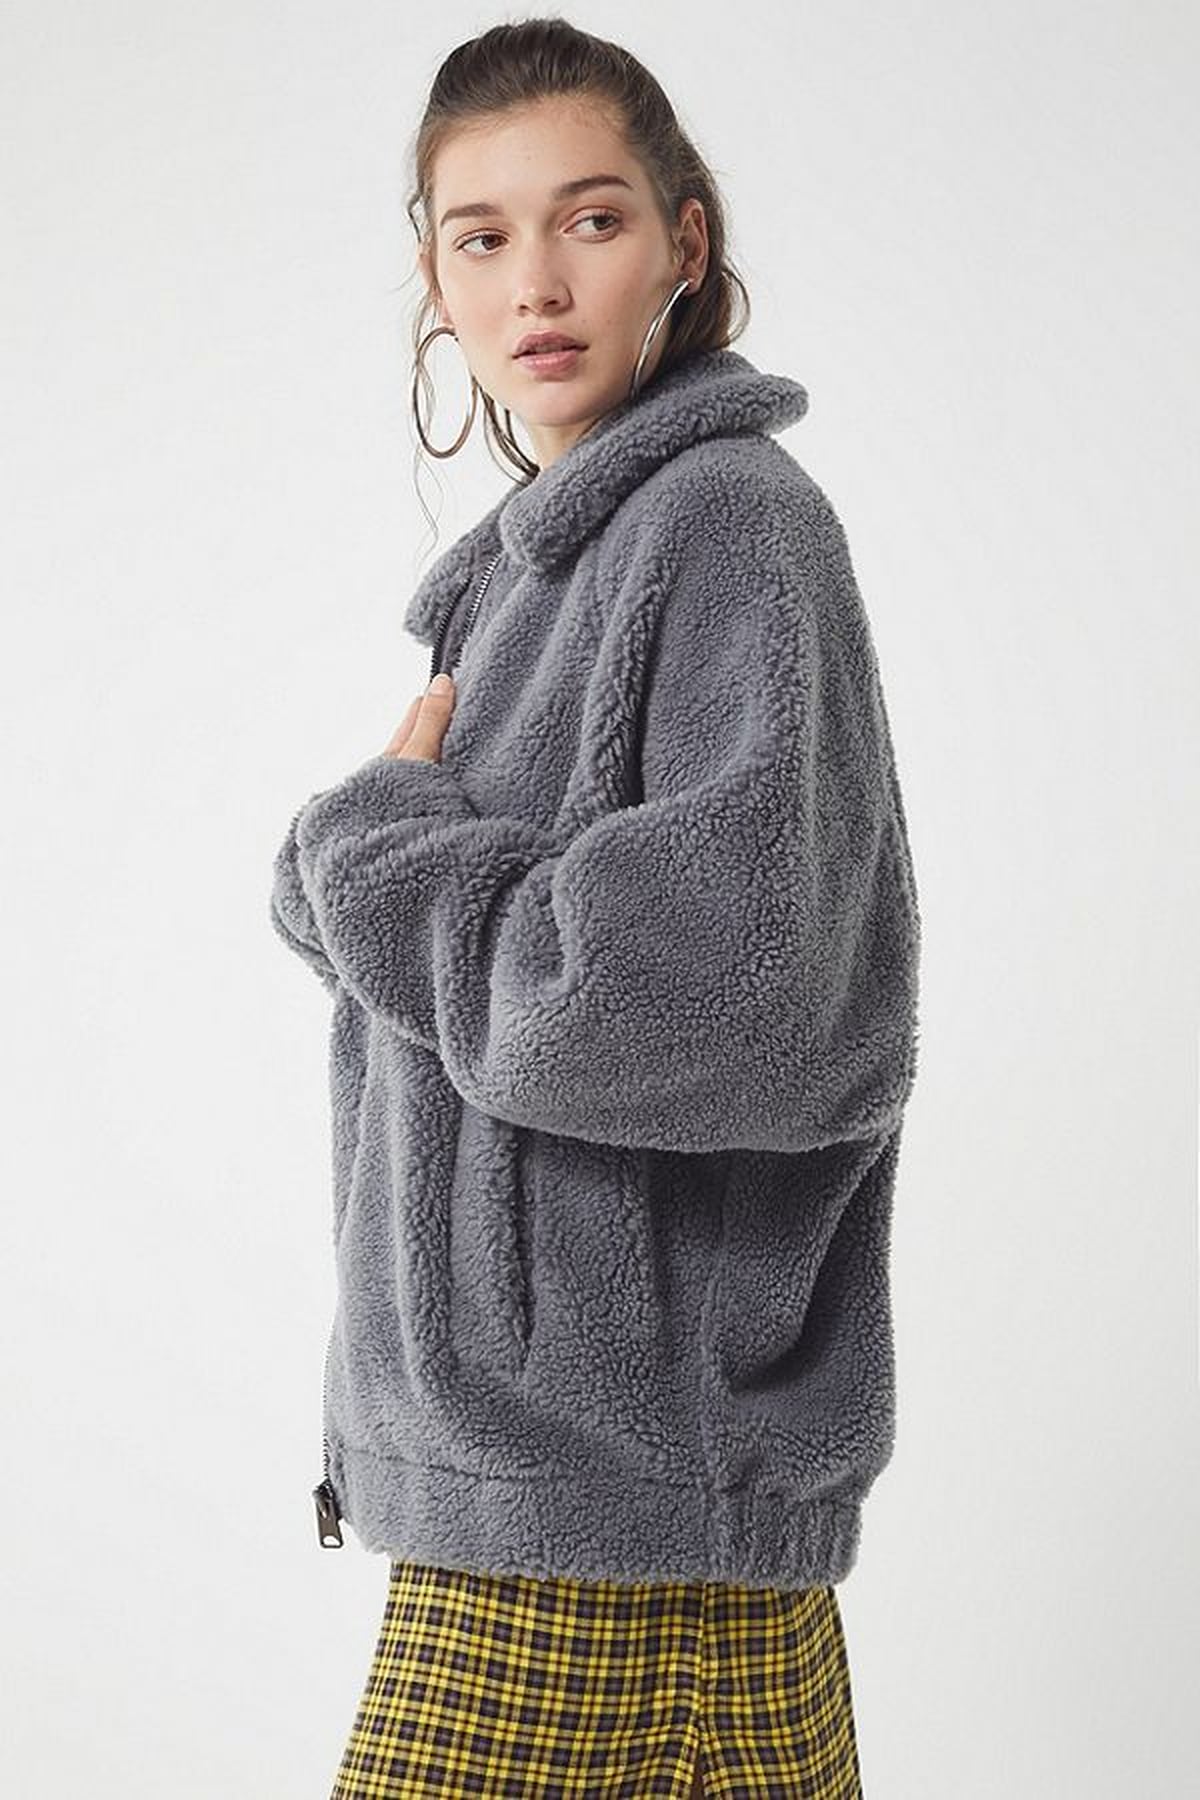 Cozy Clothes From Urban Outfitters | POPSUGAR Fashion